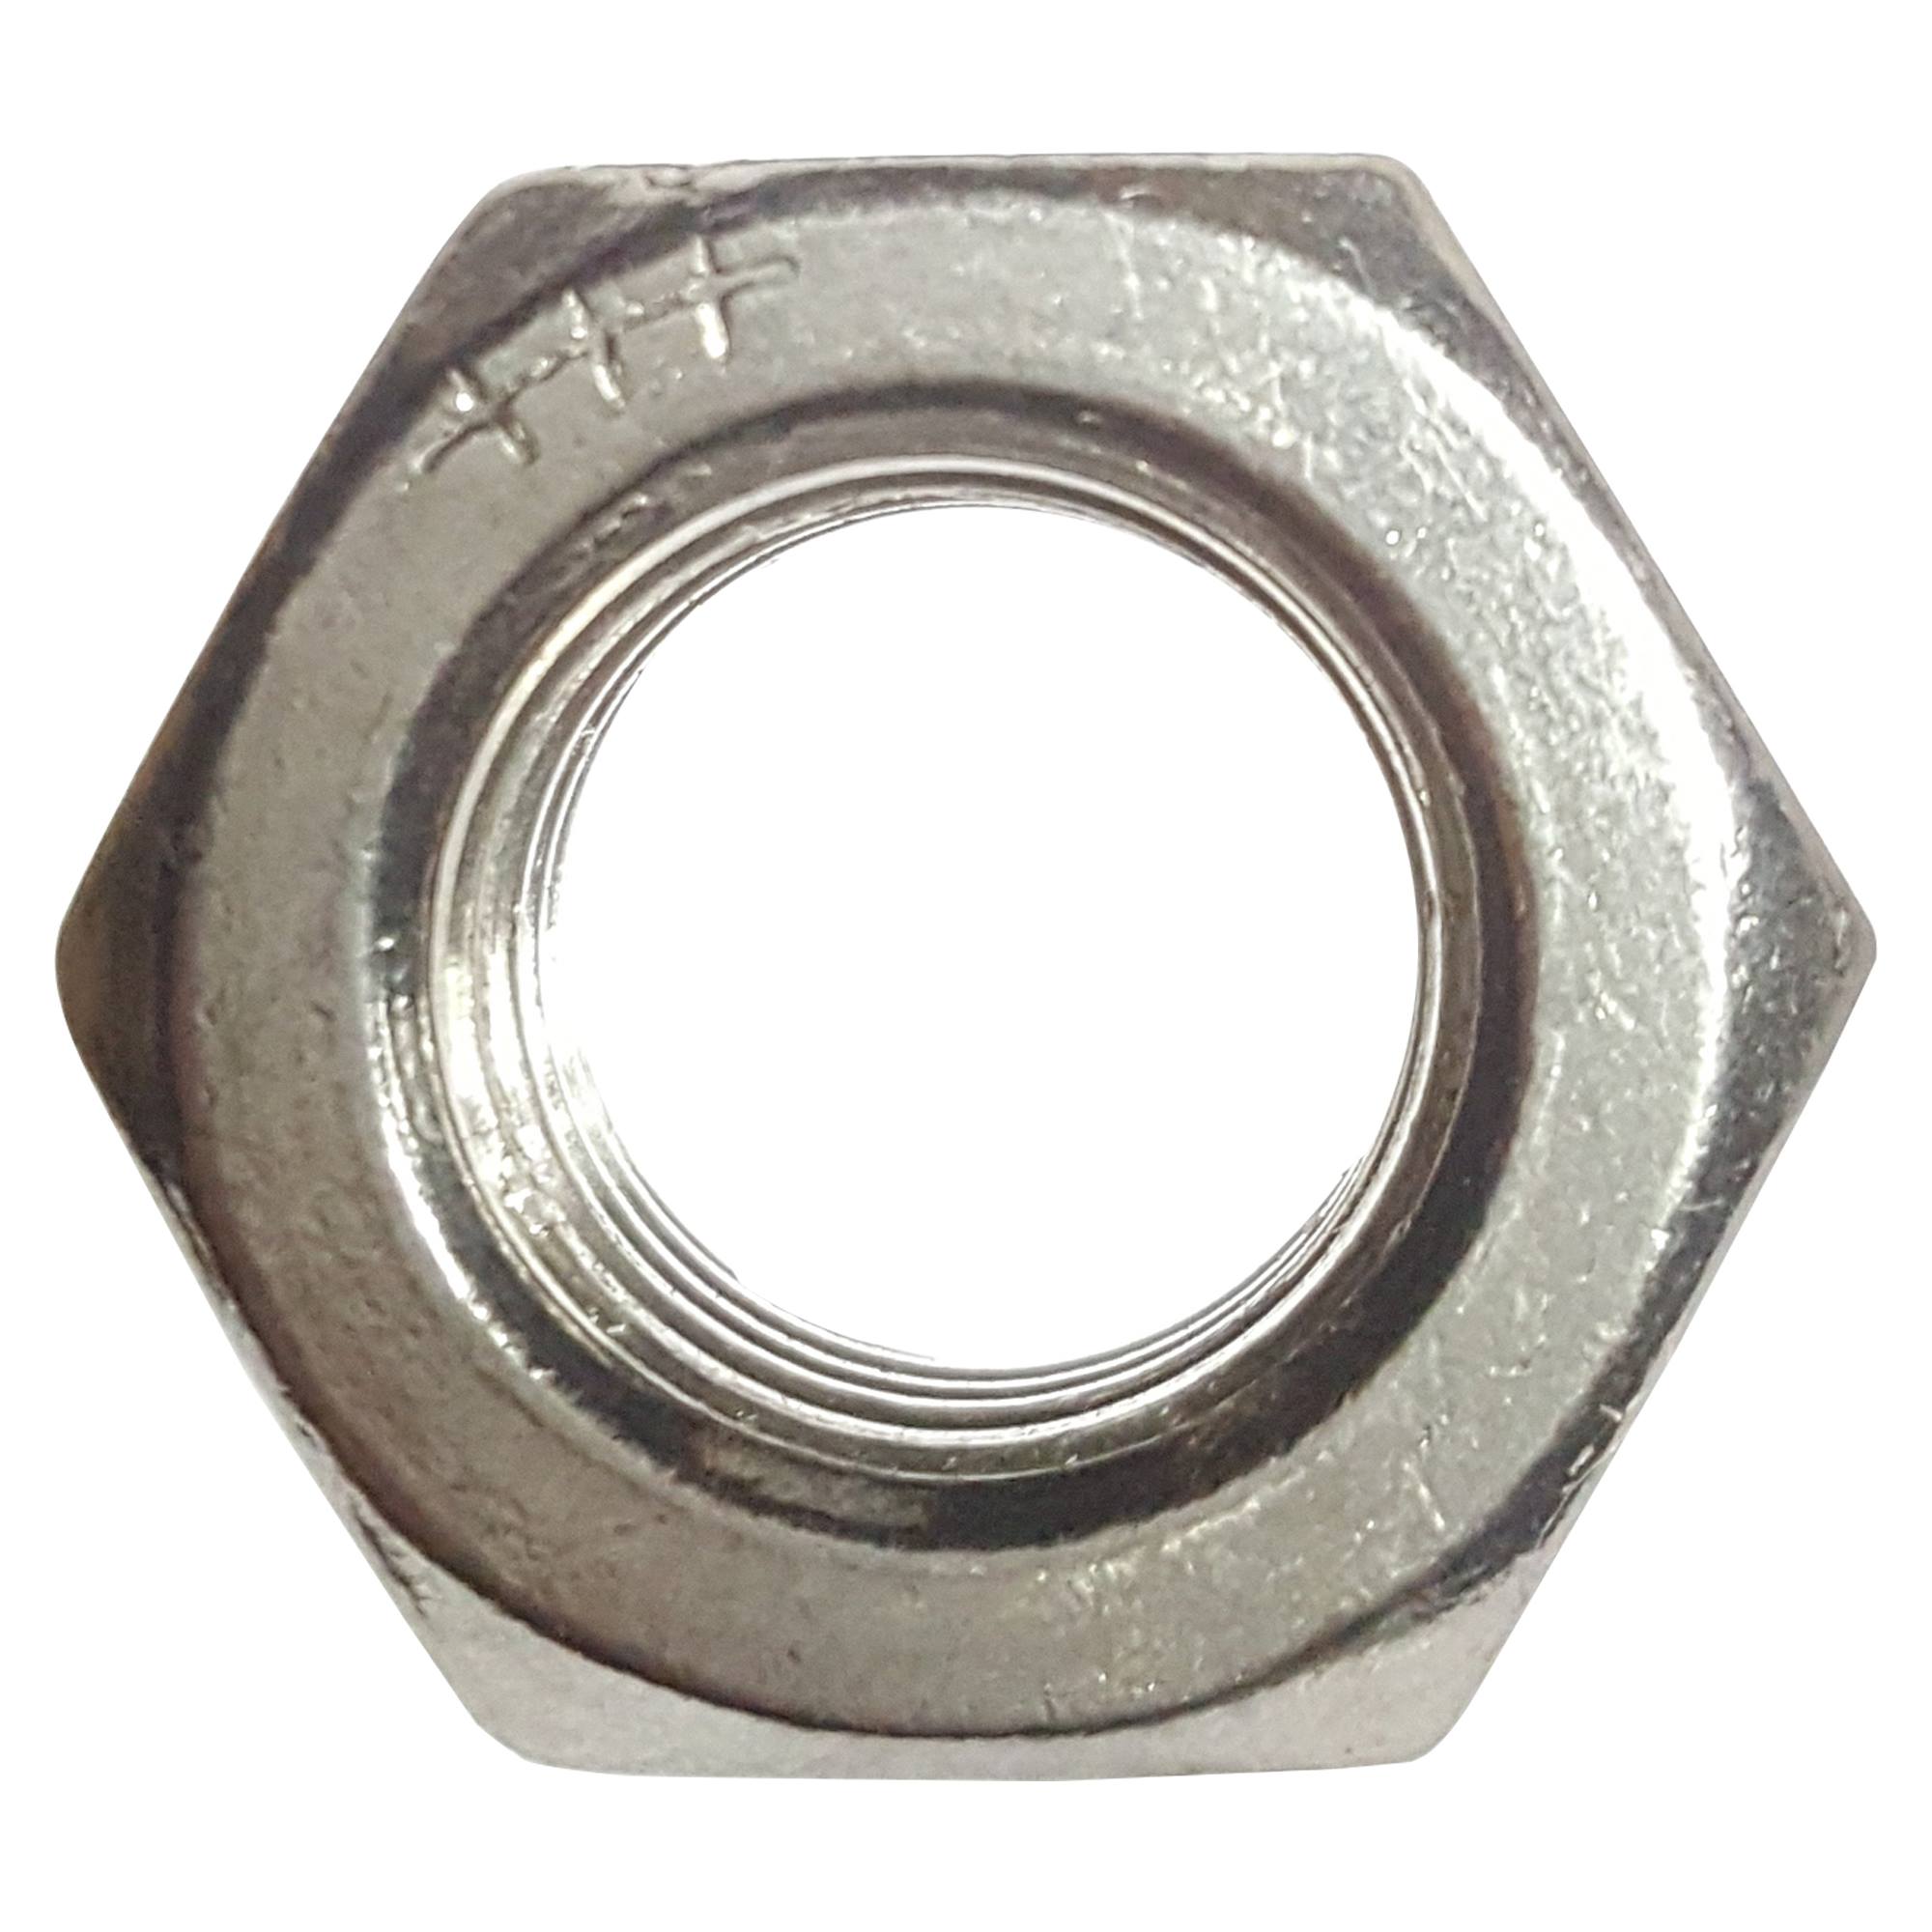 Fastenere M8 125 Finished Hex Nuts Stainless Metric Quantity 50